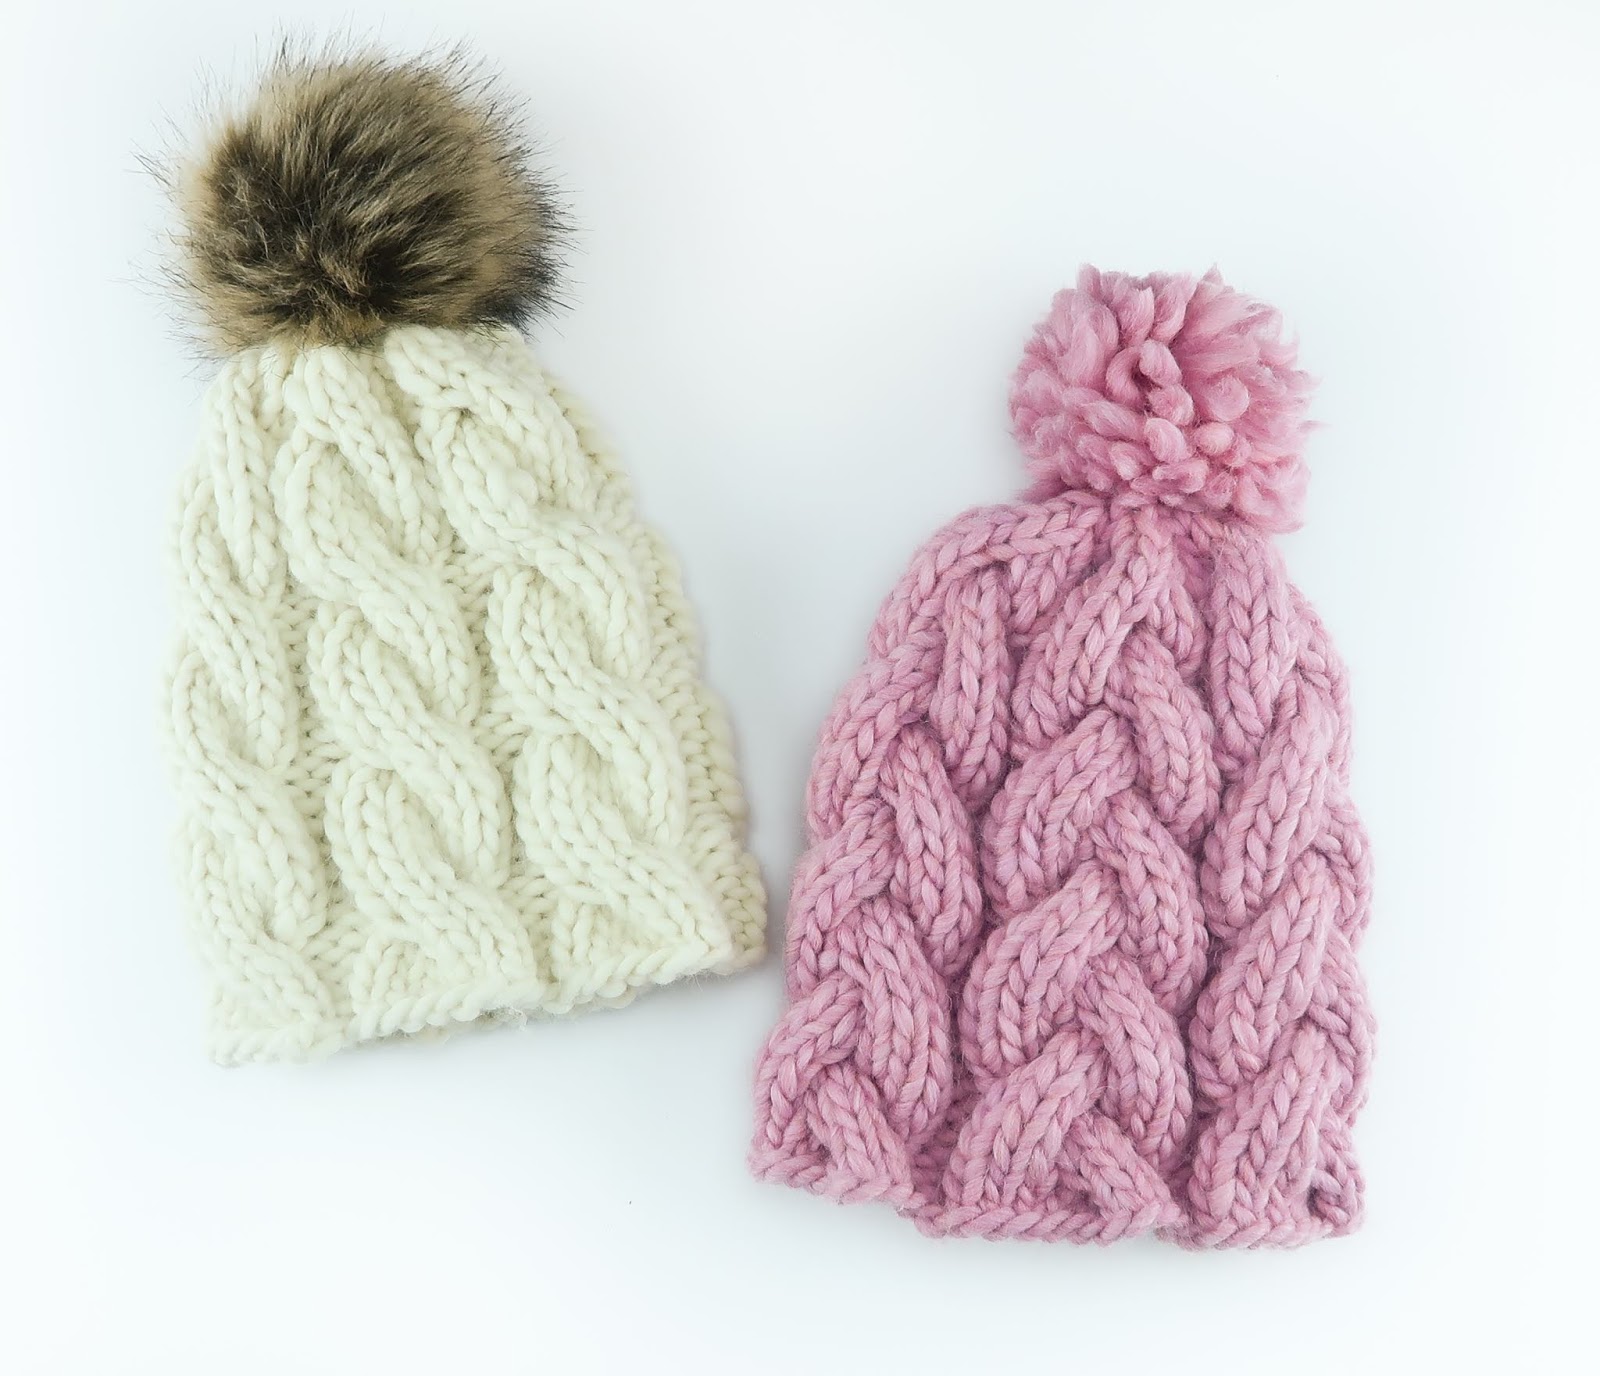 Knit Cable Braided Beanies Free Pattern Video Tutorial